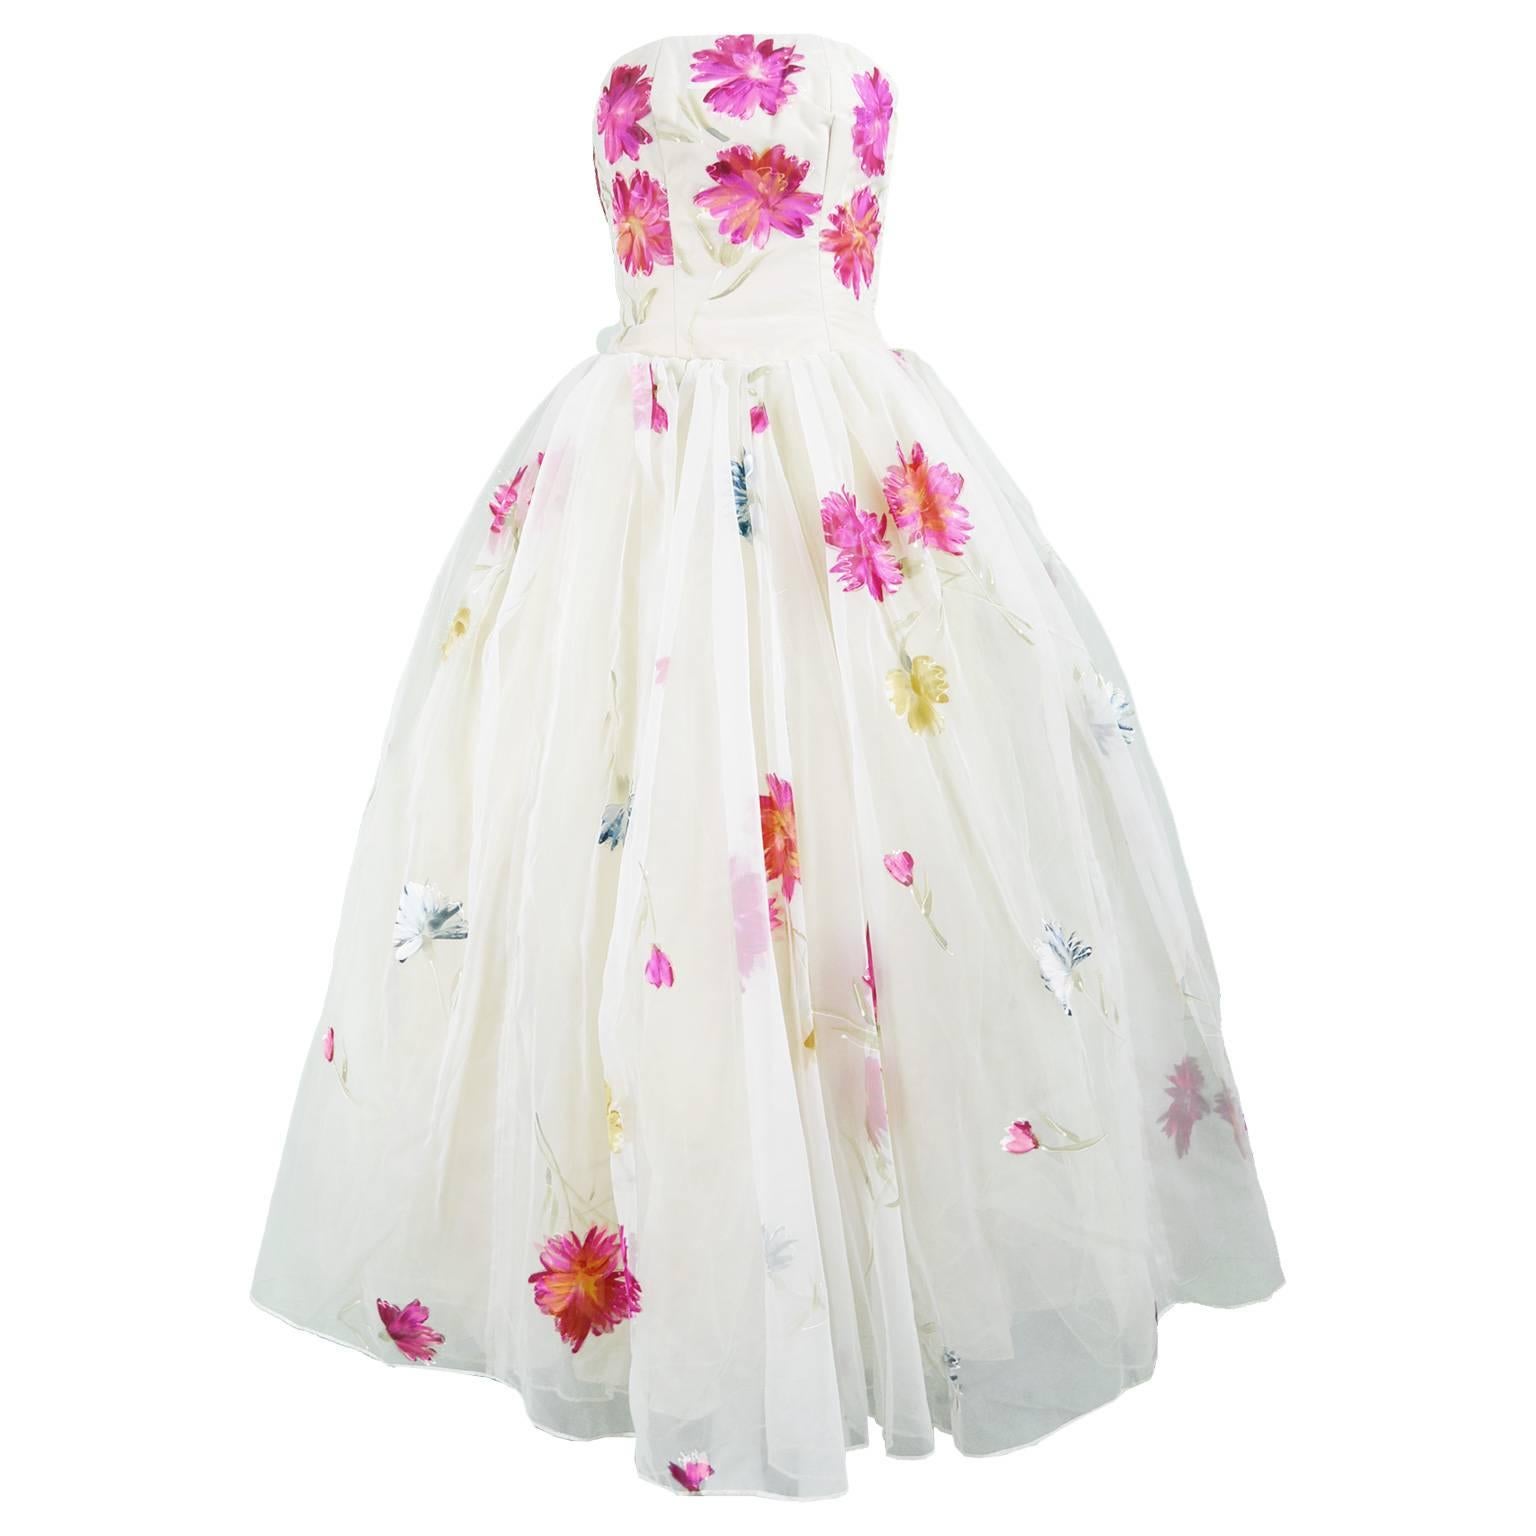 Incredible Vintage 1950s Hand Painted Organza Ball Gown with Four Underskirts